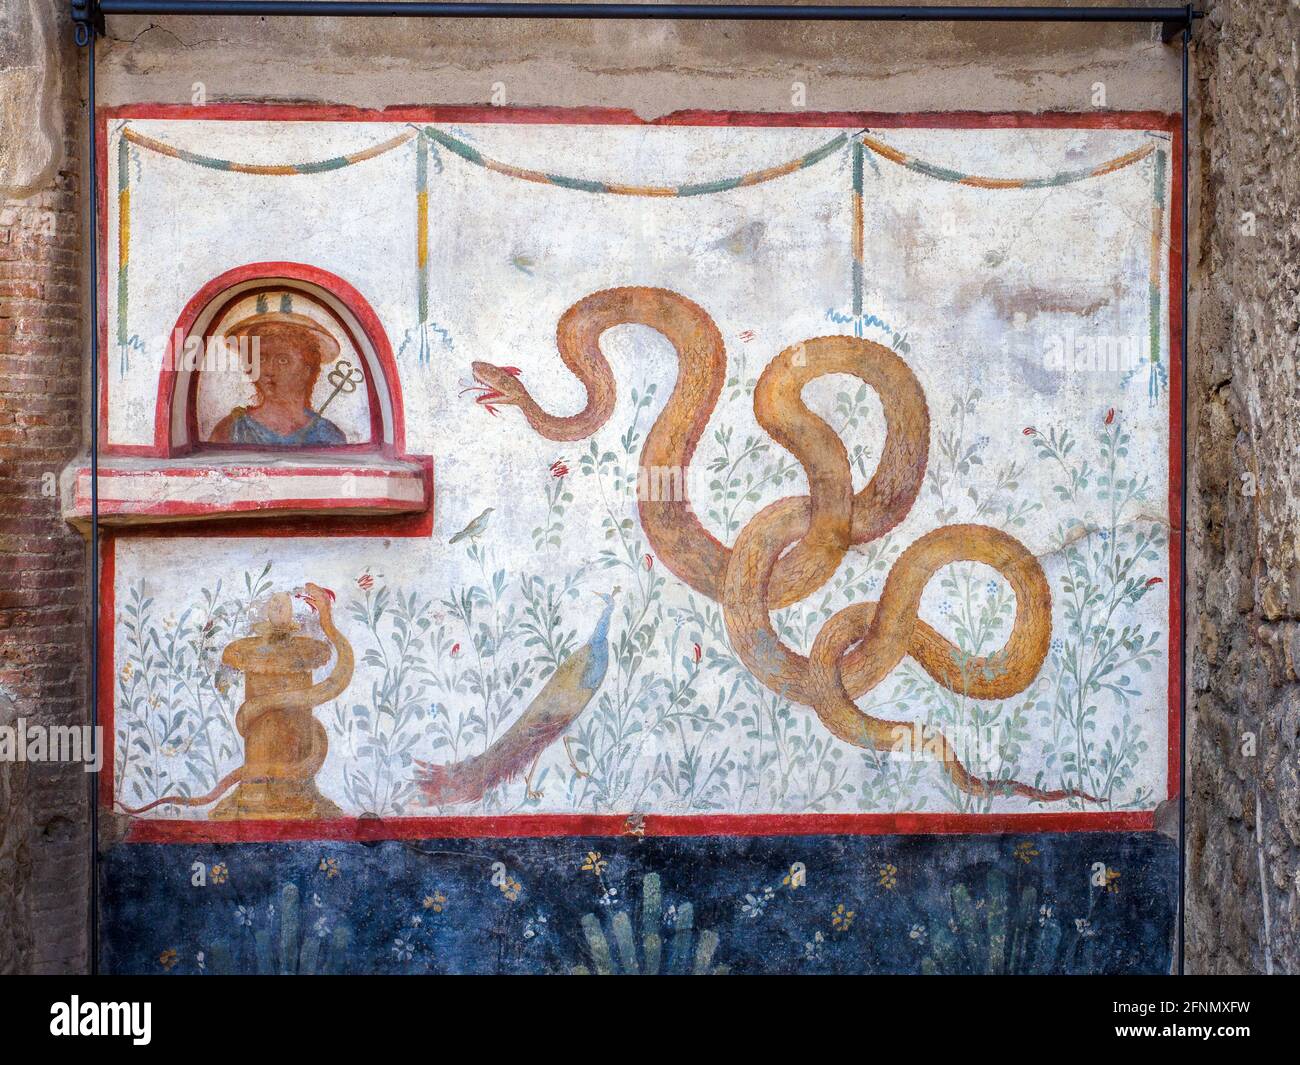 The decoration of the lararium (shrine) shows a large serpent raising its head towards a bust of Mercury set in an arched niche above a projecting ledge Under the niche is a second snake coiled round a small altar. In the background are a variety of plants and bird life including a rather splendid peacock - House of the Cryptoporticus (Casa del Criptoportico)- Pompeii archaeological site, Italy Stock Photo